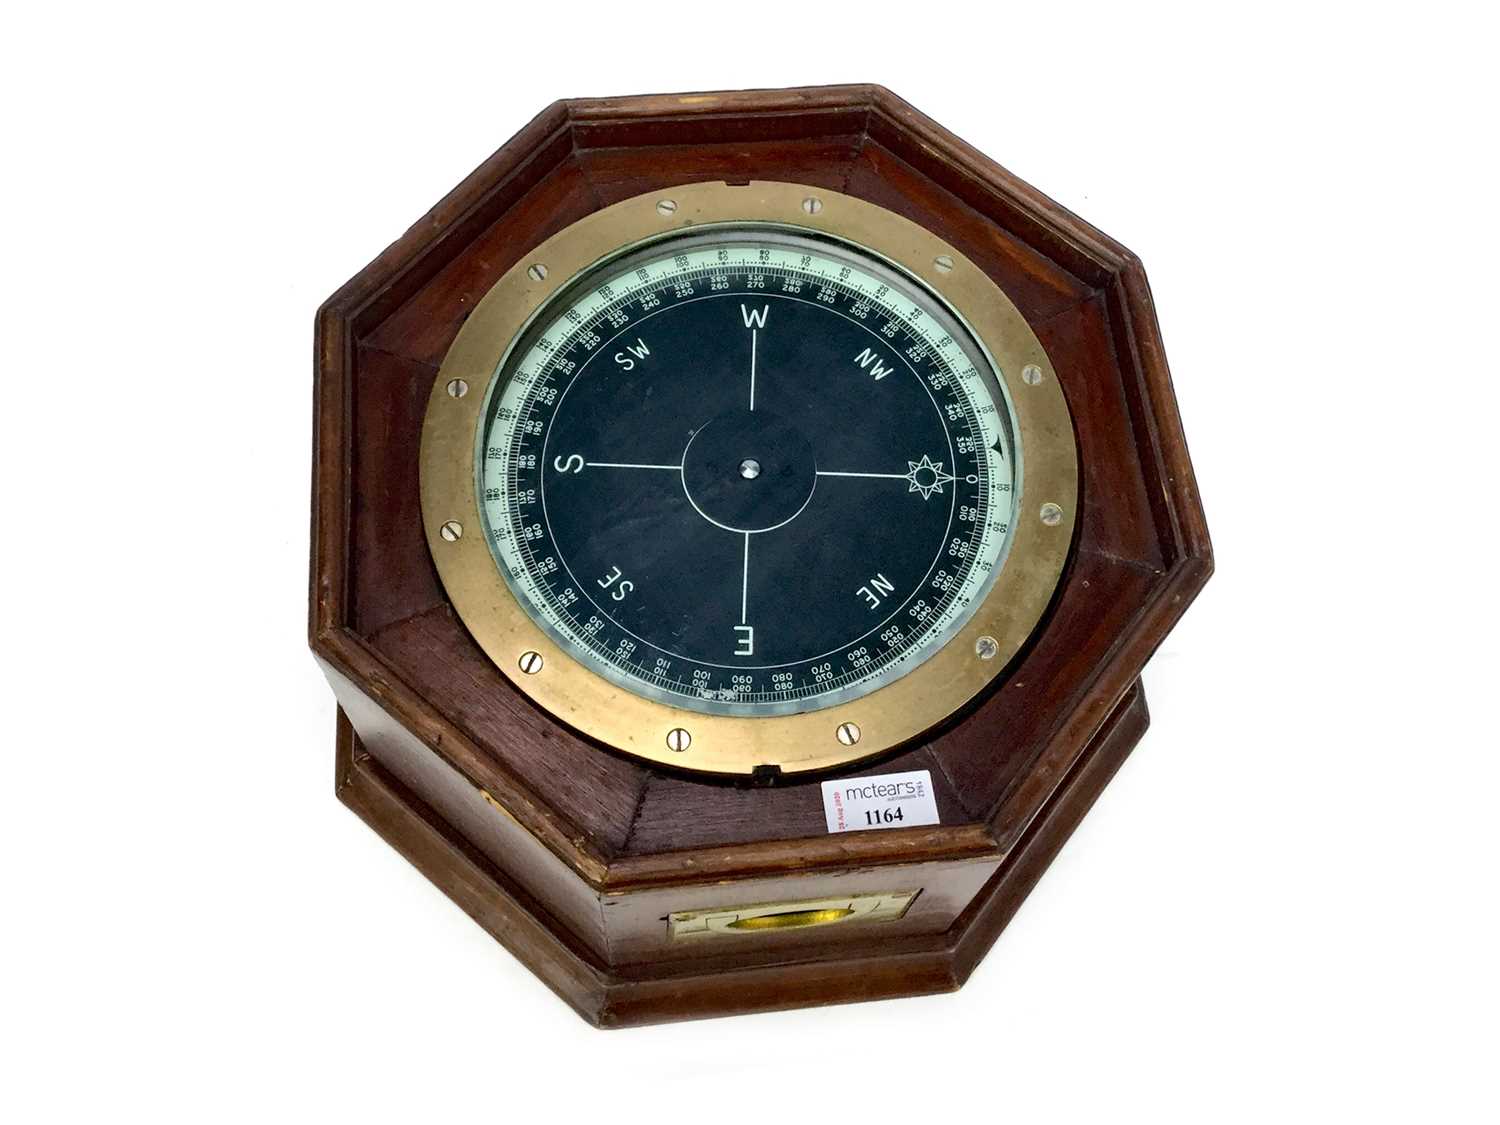 Lot 1164 - A MID-20TH CENTURY SHIP'S COMPASS